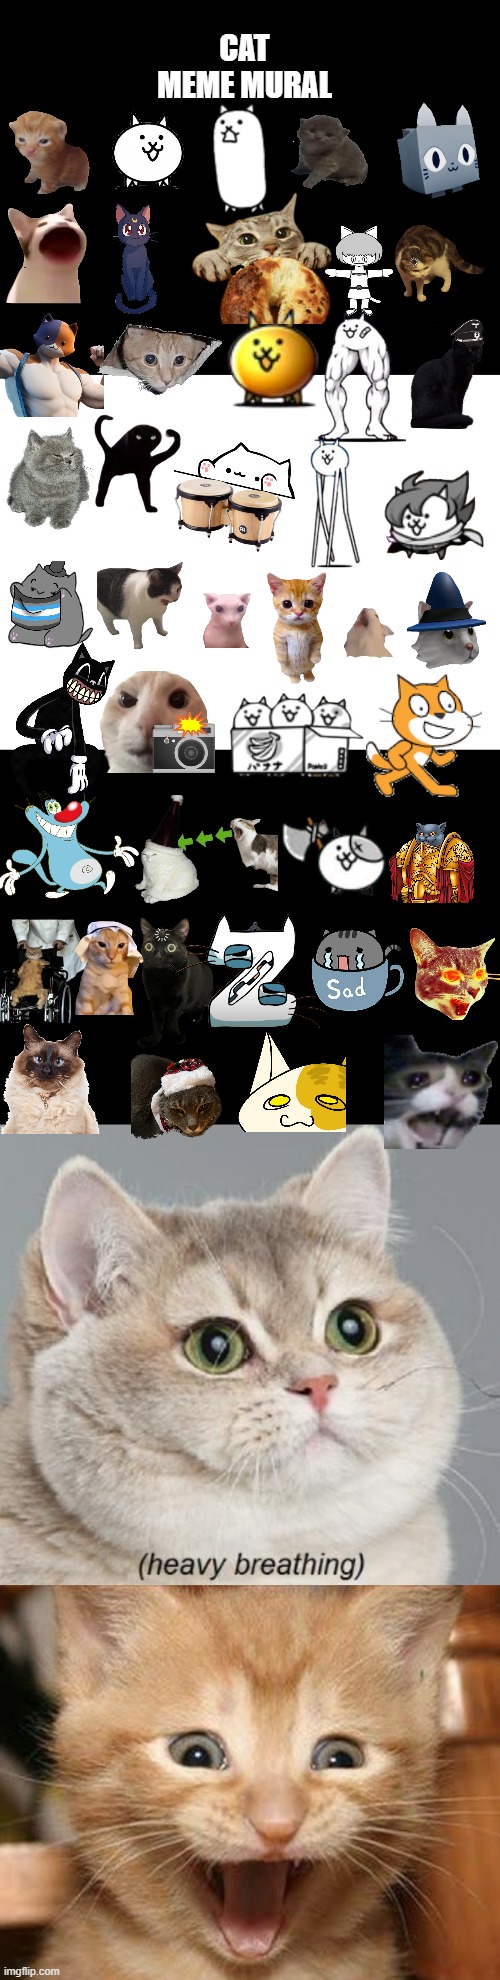 omg this took forever | CAT MEME MURAL | image tagged in memes,heavy breathing cat,excited cat,cats,battle,funny cats | made w/ Imgflip meme maker